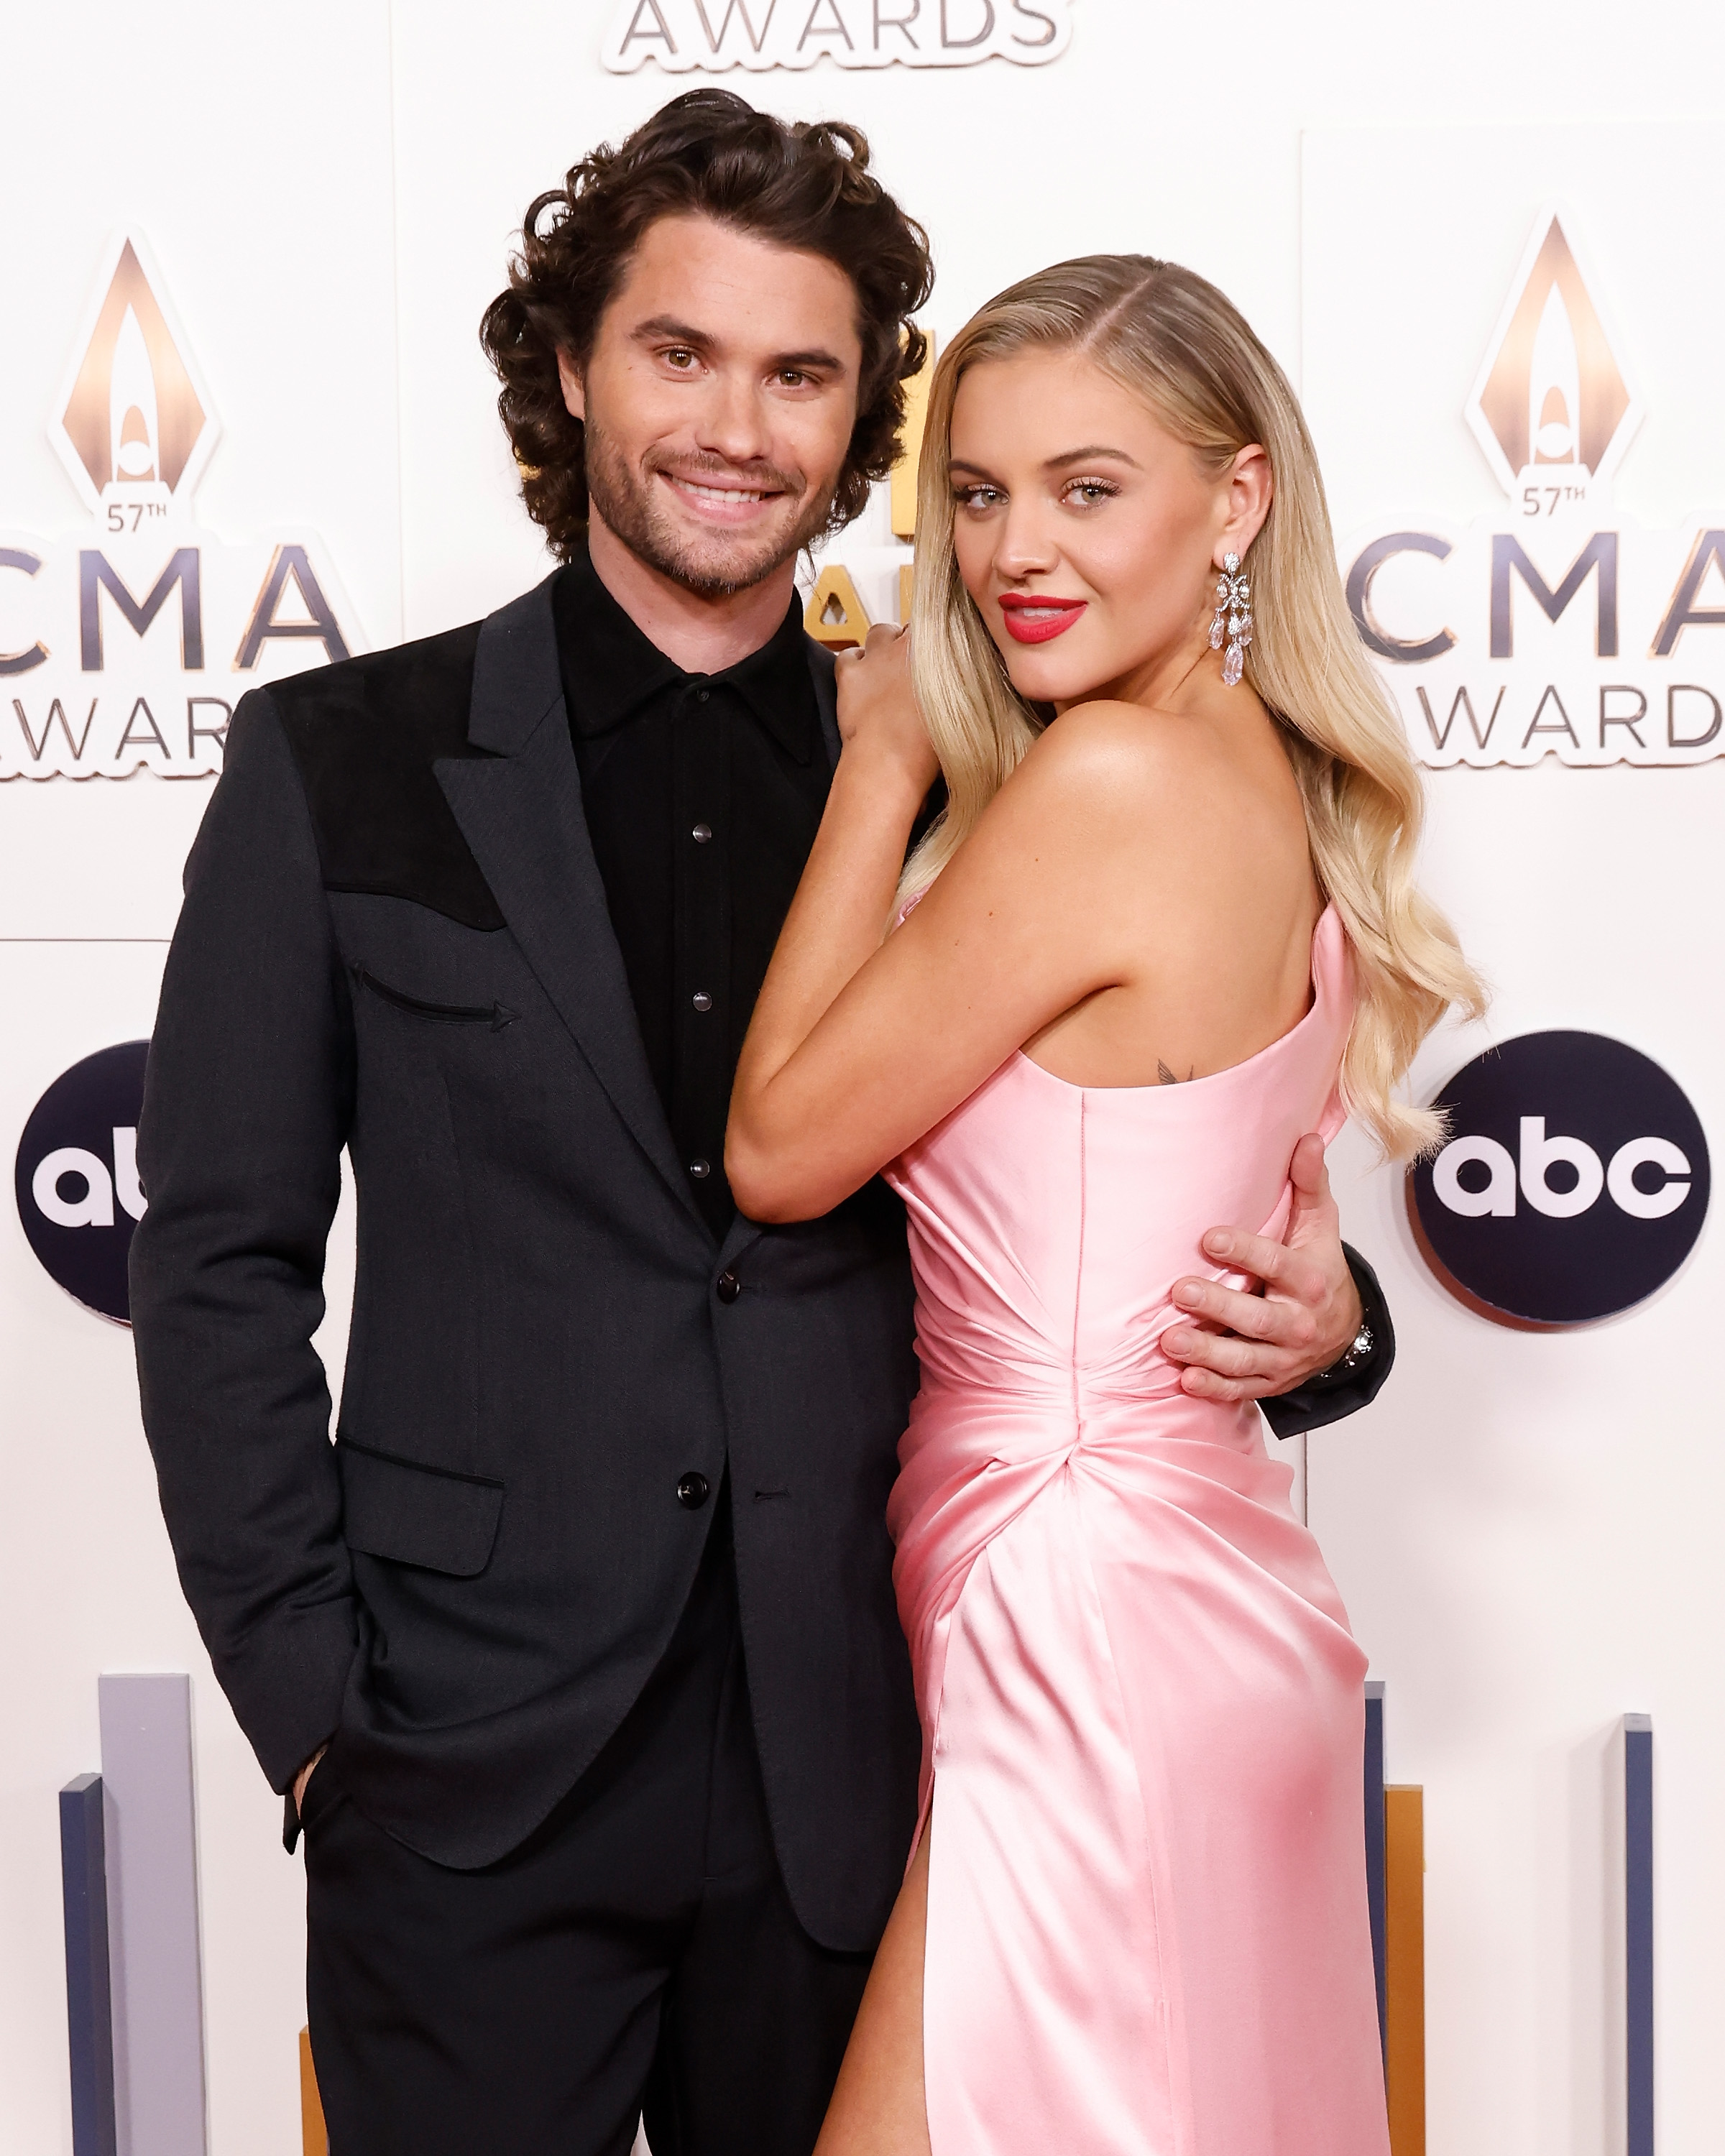 Kelsea's boyfriend, Chase Stokes, joined fans in gushing over the news in the comment section